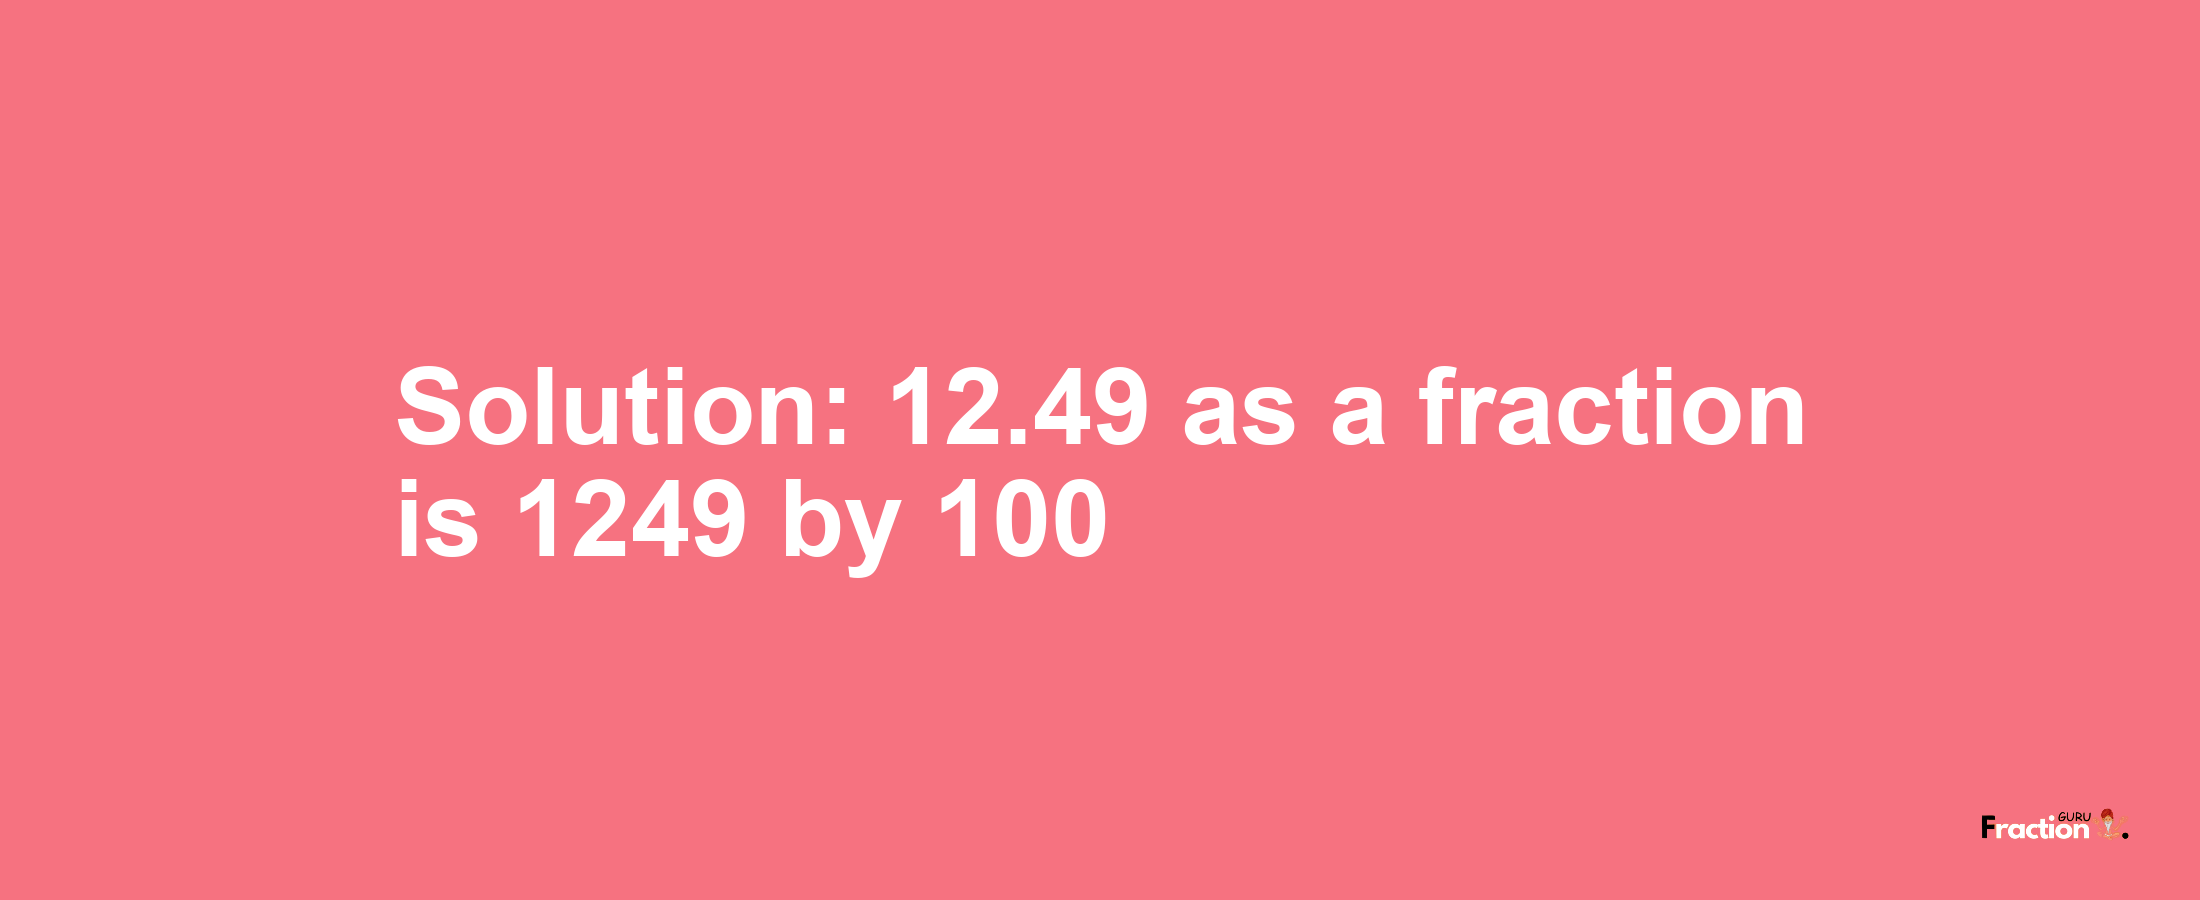 Solution:12.49 as a fraction is 1249/100